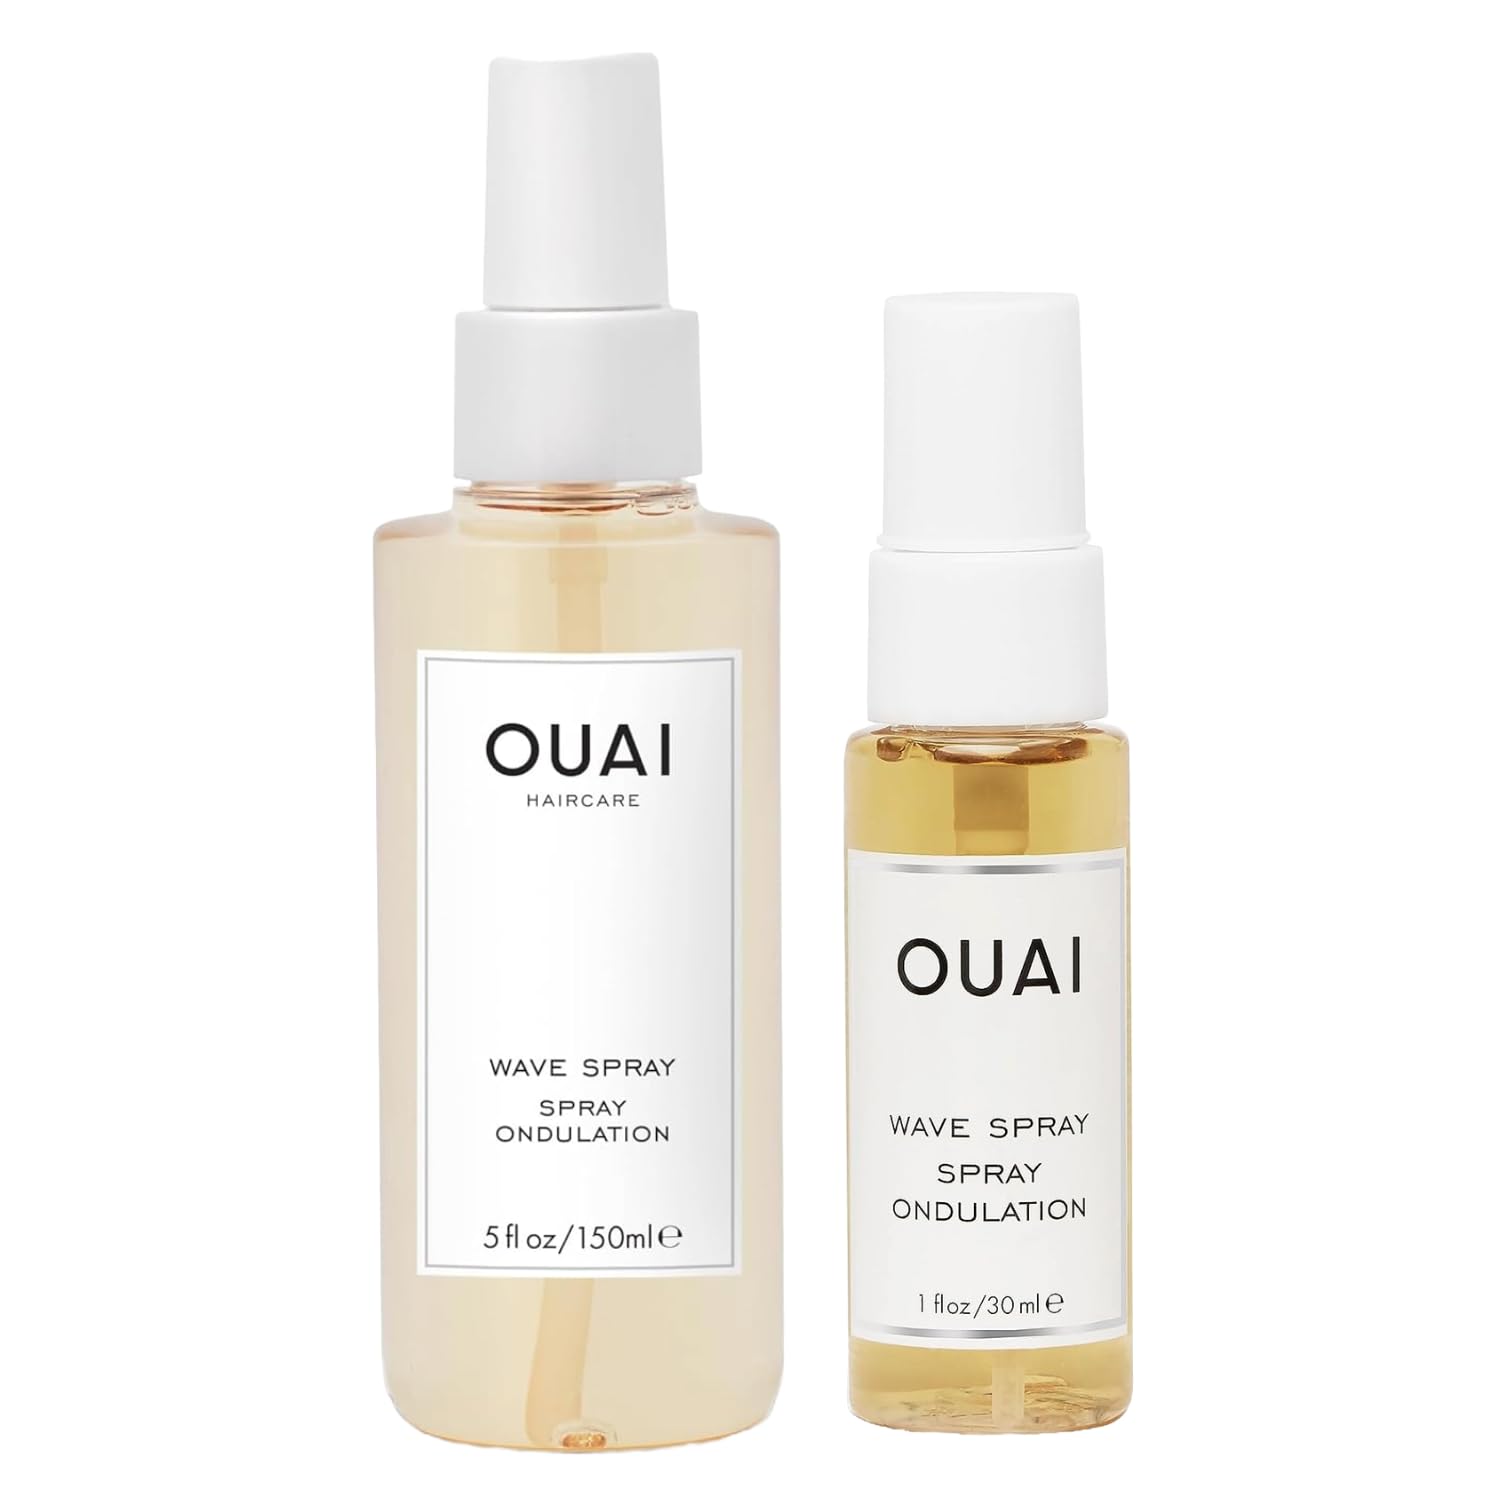 OUAI Wave Spray Bundle - Texture Spray for Hair with Coconut Oil and Rice Protein - Adds Texture, Volume & Shine for Effortless Beach Waves - Safe for Color Treated Hair (2 Count, 1.7 fl oz/4.9 fl oz)